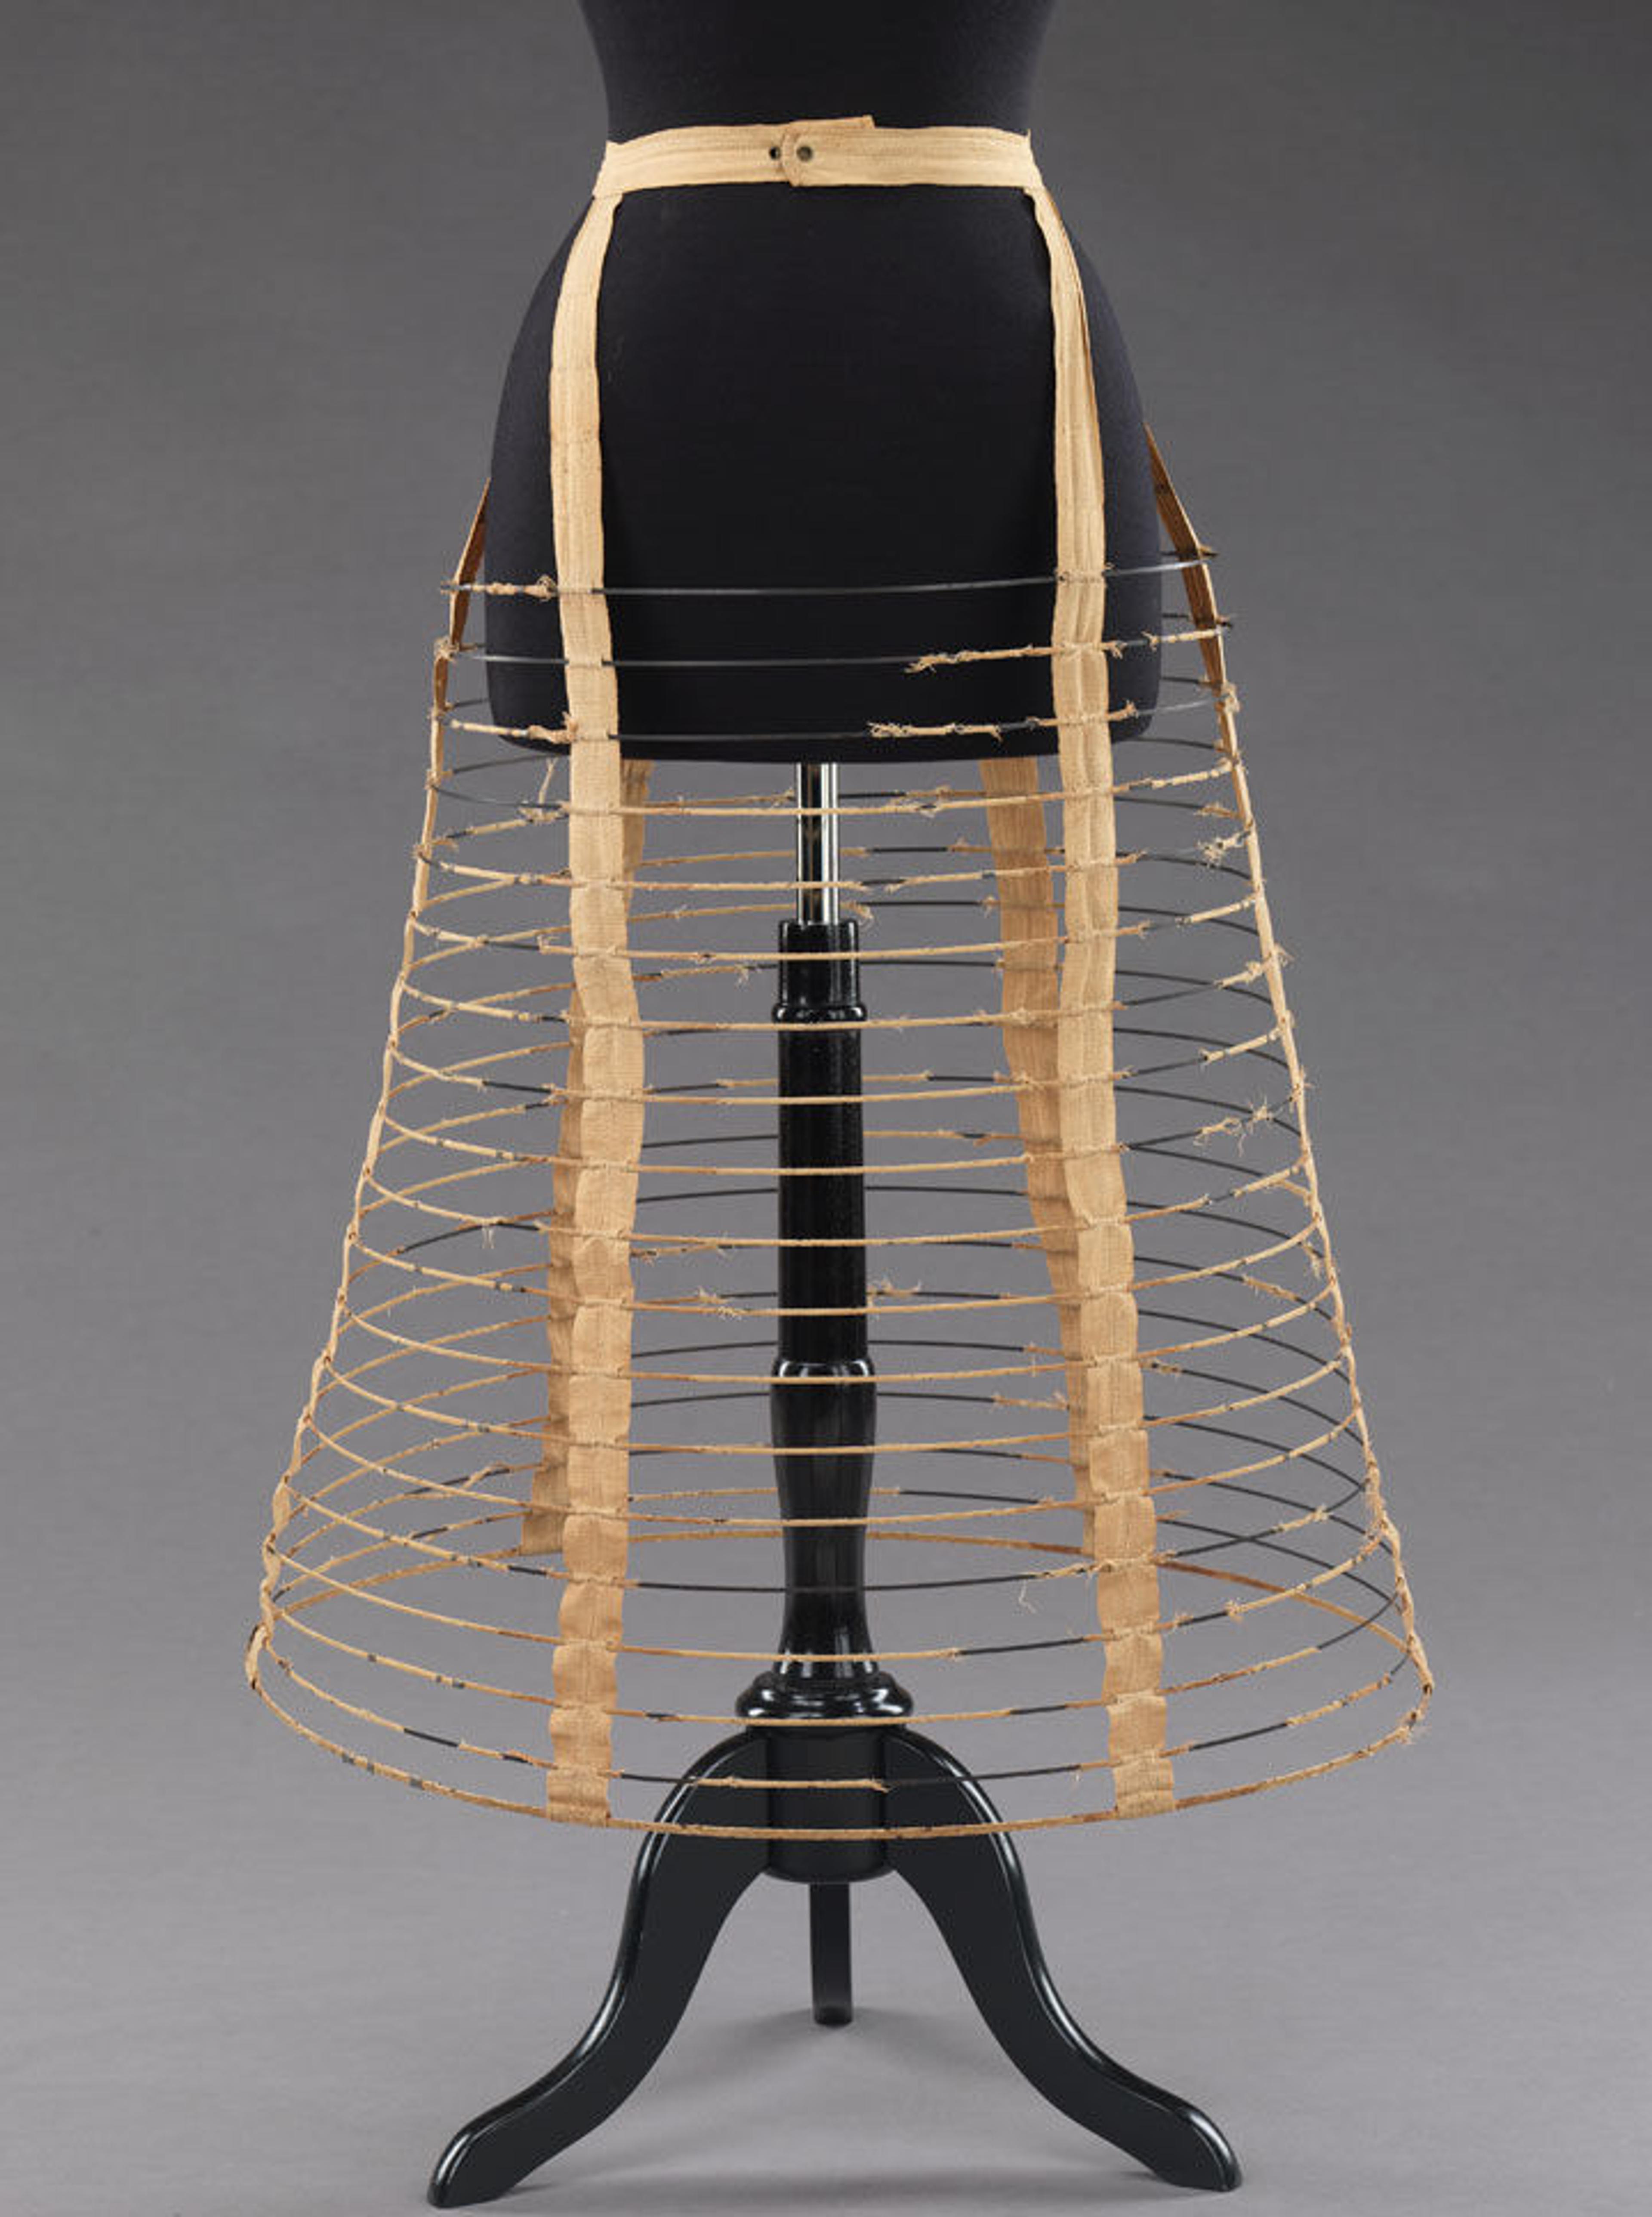 Cage crinoline from the Royal Worcester Corset Company